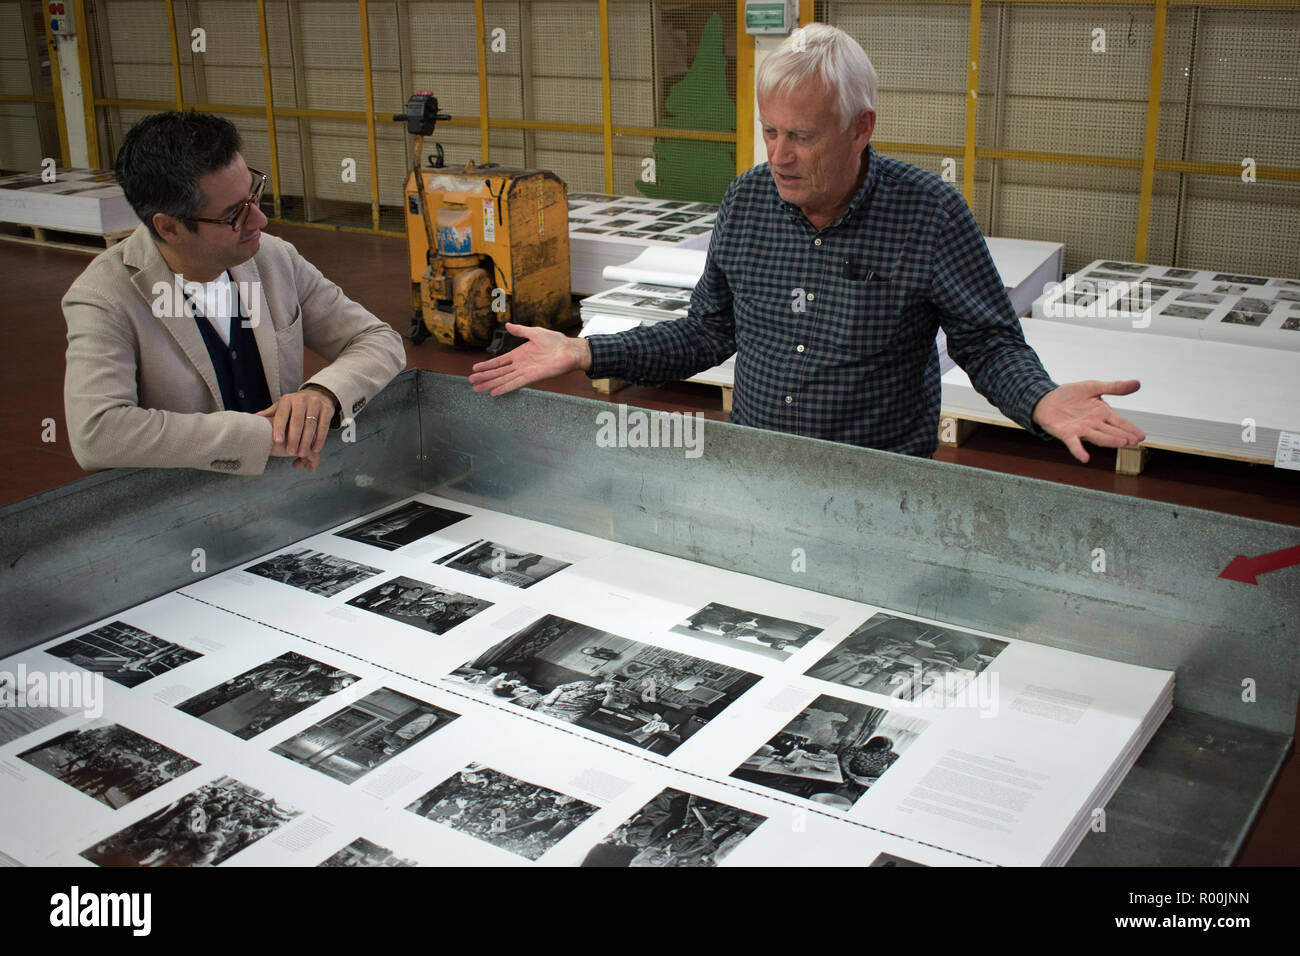 Dewi Lewis British photography book publisher on press publishing My British Archive, The Way We Were 1968-1983 at EBS Verona Italy. Jonathan Bortolazzi MD of EBS looking at page proofs. 2018 HOMER SYKES Stock Photo